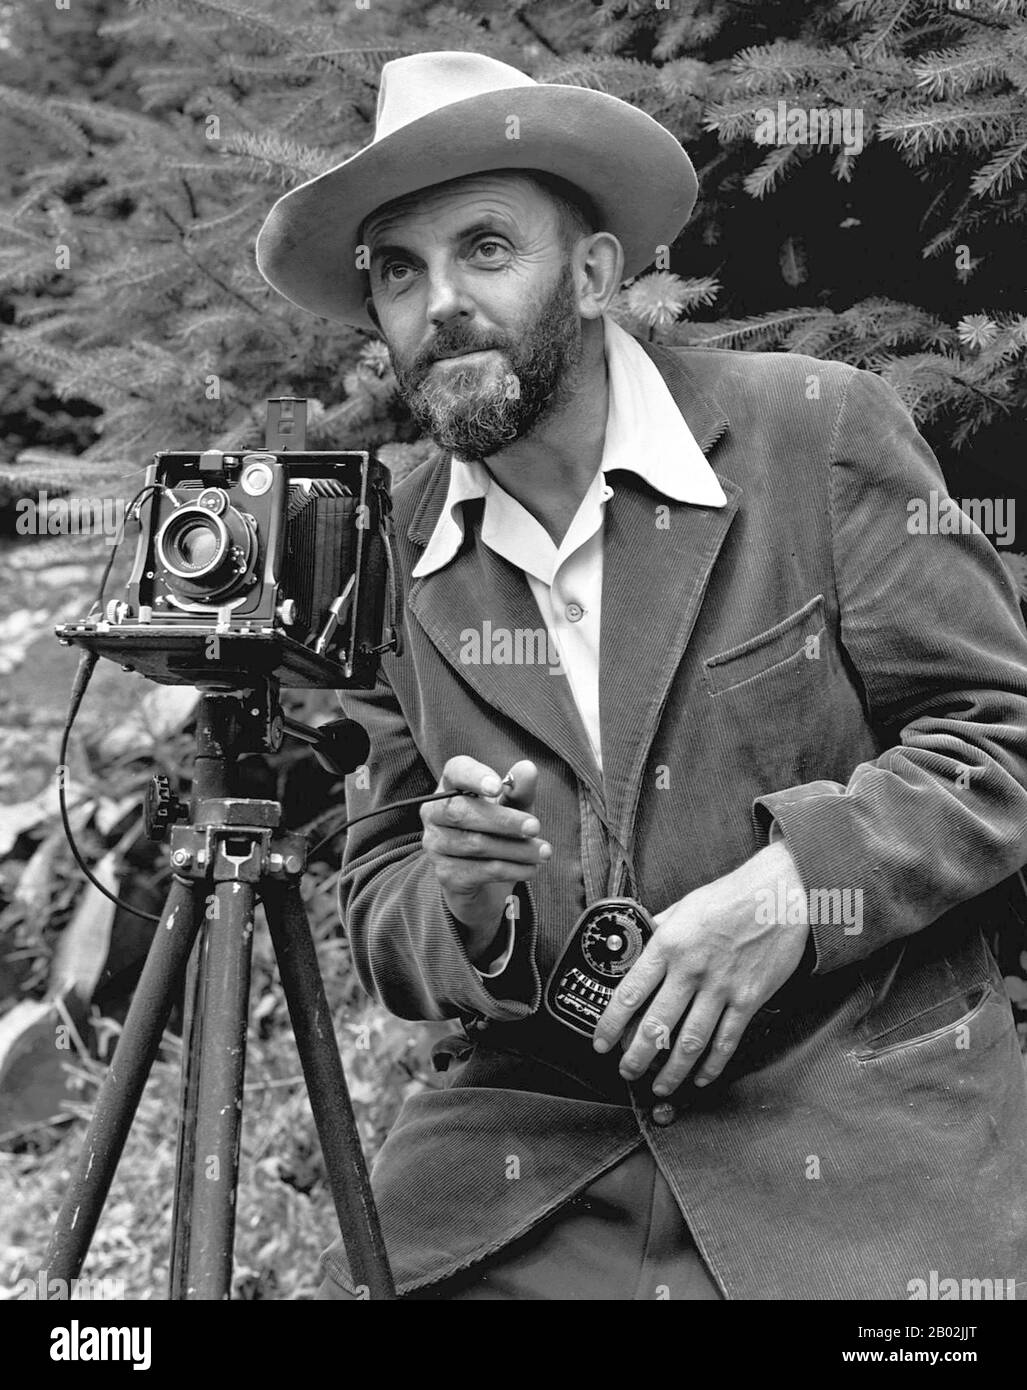 Ansel Easton Adams (February 20, 1902 – April 22, 1984) was an American photographer and environmentalist. His black-and-white landscape photographs of the American West, especially Yosemite National Park, have been widely reproduced on calendars, posters, and in books.  With Fred Archer, Adams developed the Zone System as a way to determine proper exposure and adjust the contrast of the final print. The resulting clarity and depth characterized his photographs. Adams primarily used large-format cameras because their high resolution helped ensure sharpness in his images.  Adams was distressed Stock Photo